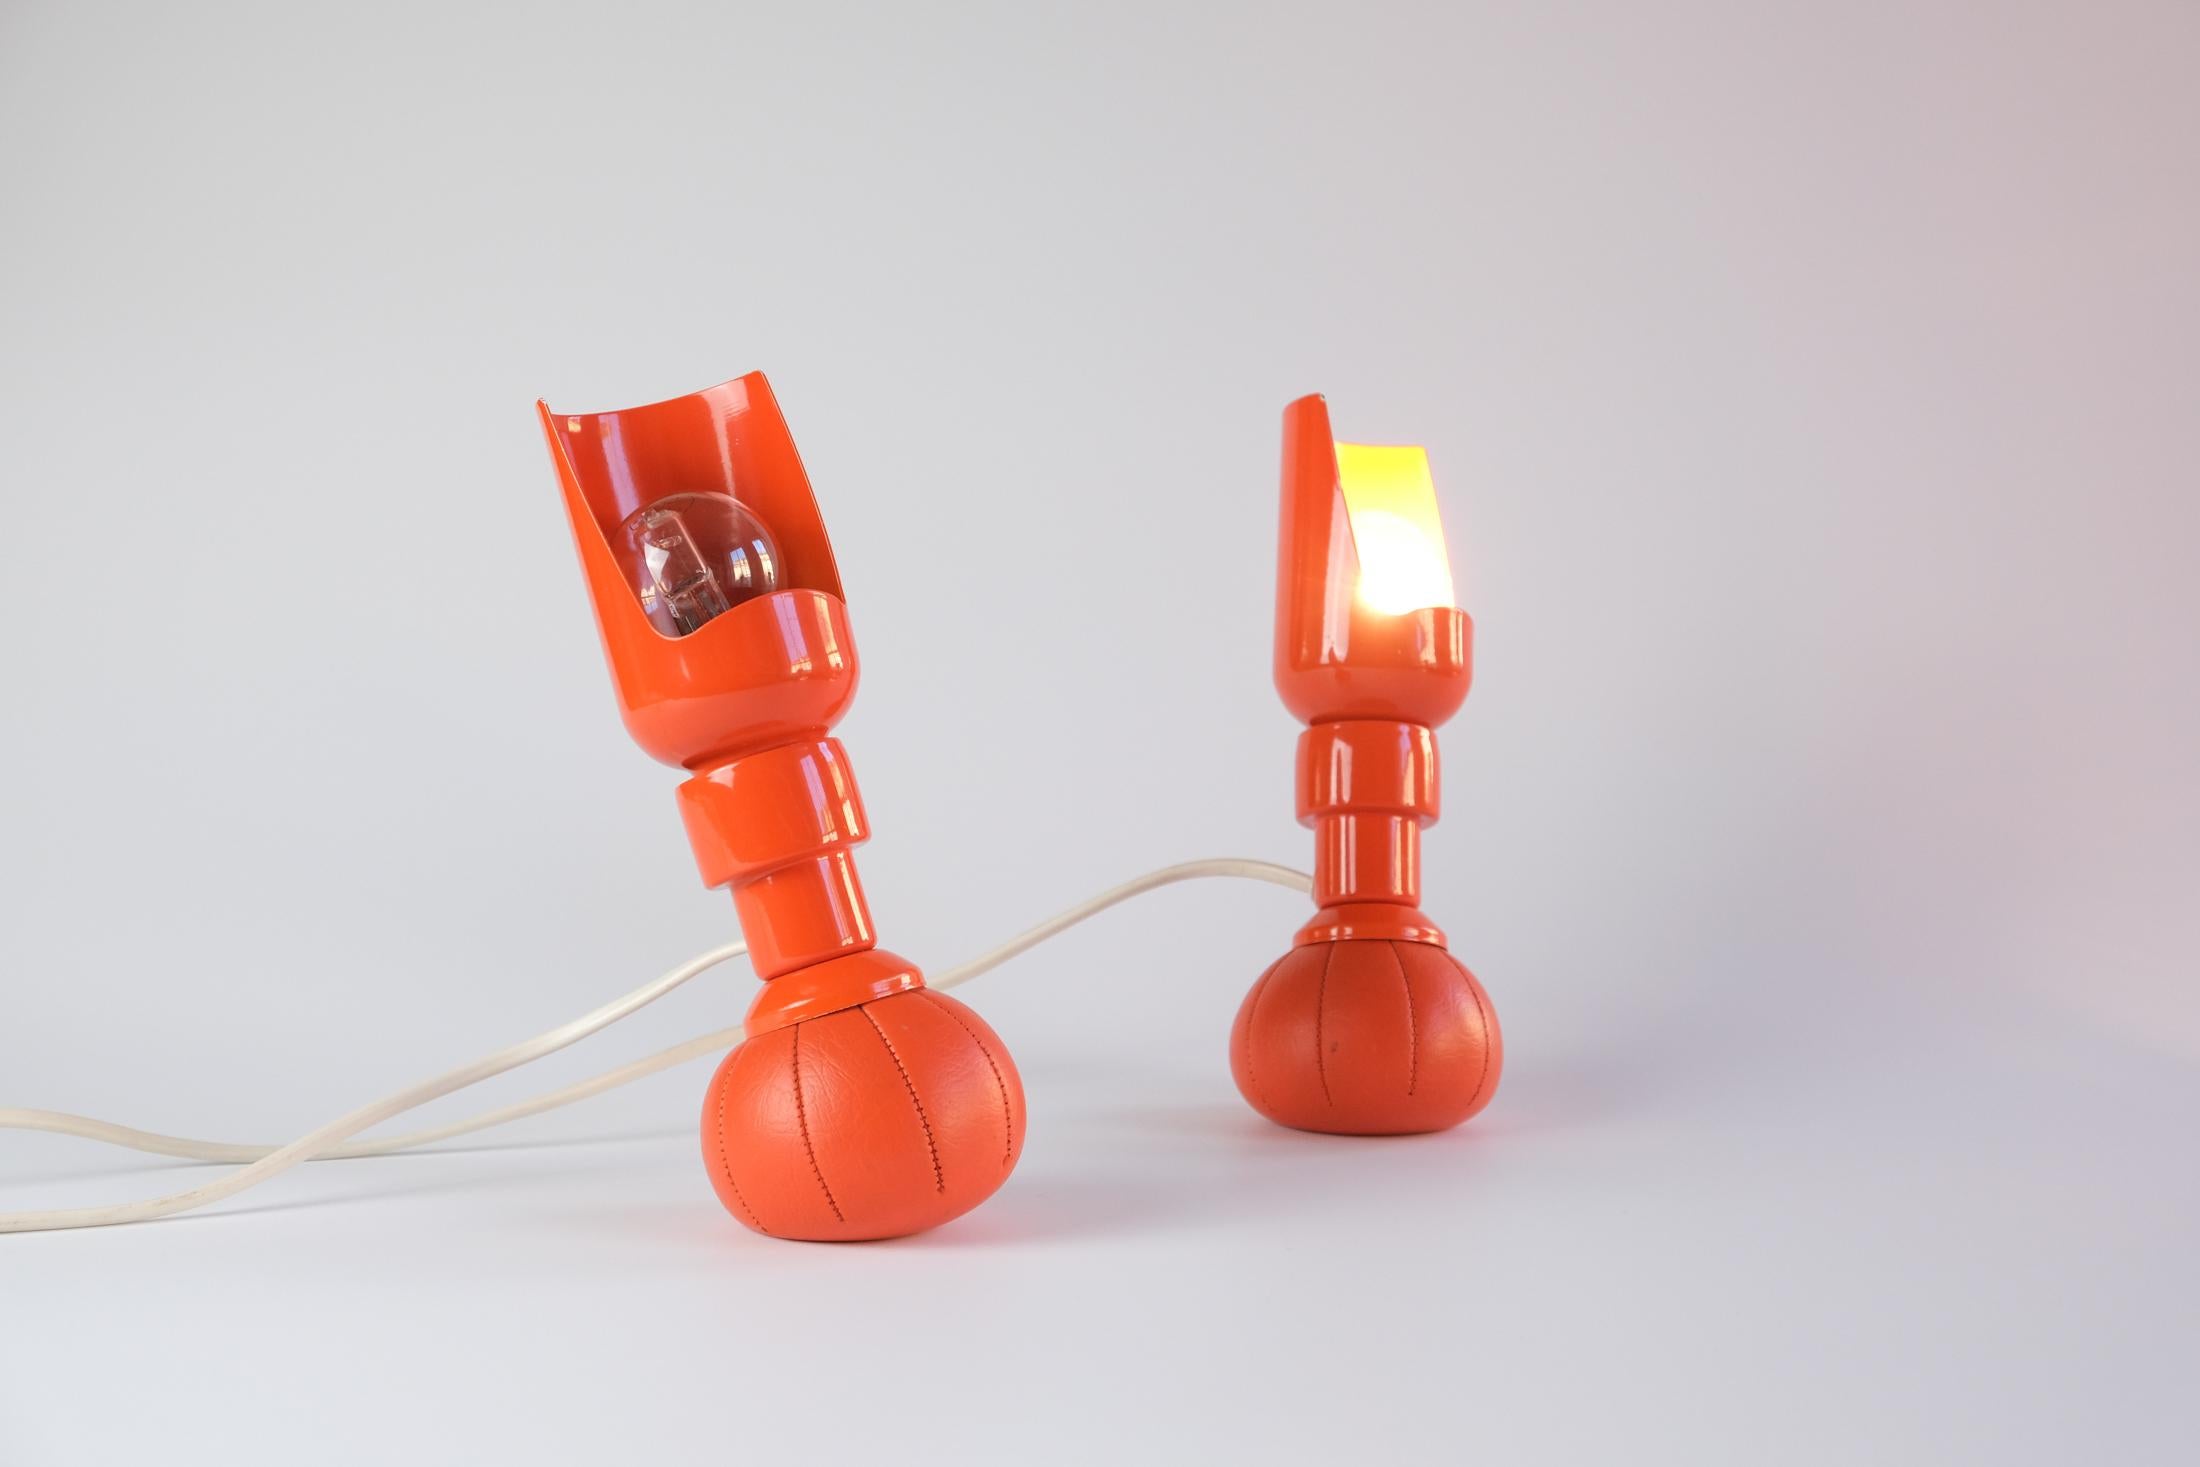 Rare Pair of Mid-Century Gino Sarfatti Model 600P Lamps for Arteluce, Italy 1966 For Sale 6